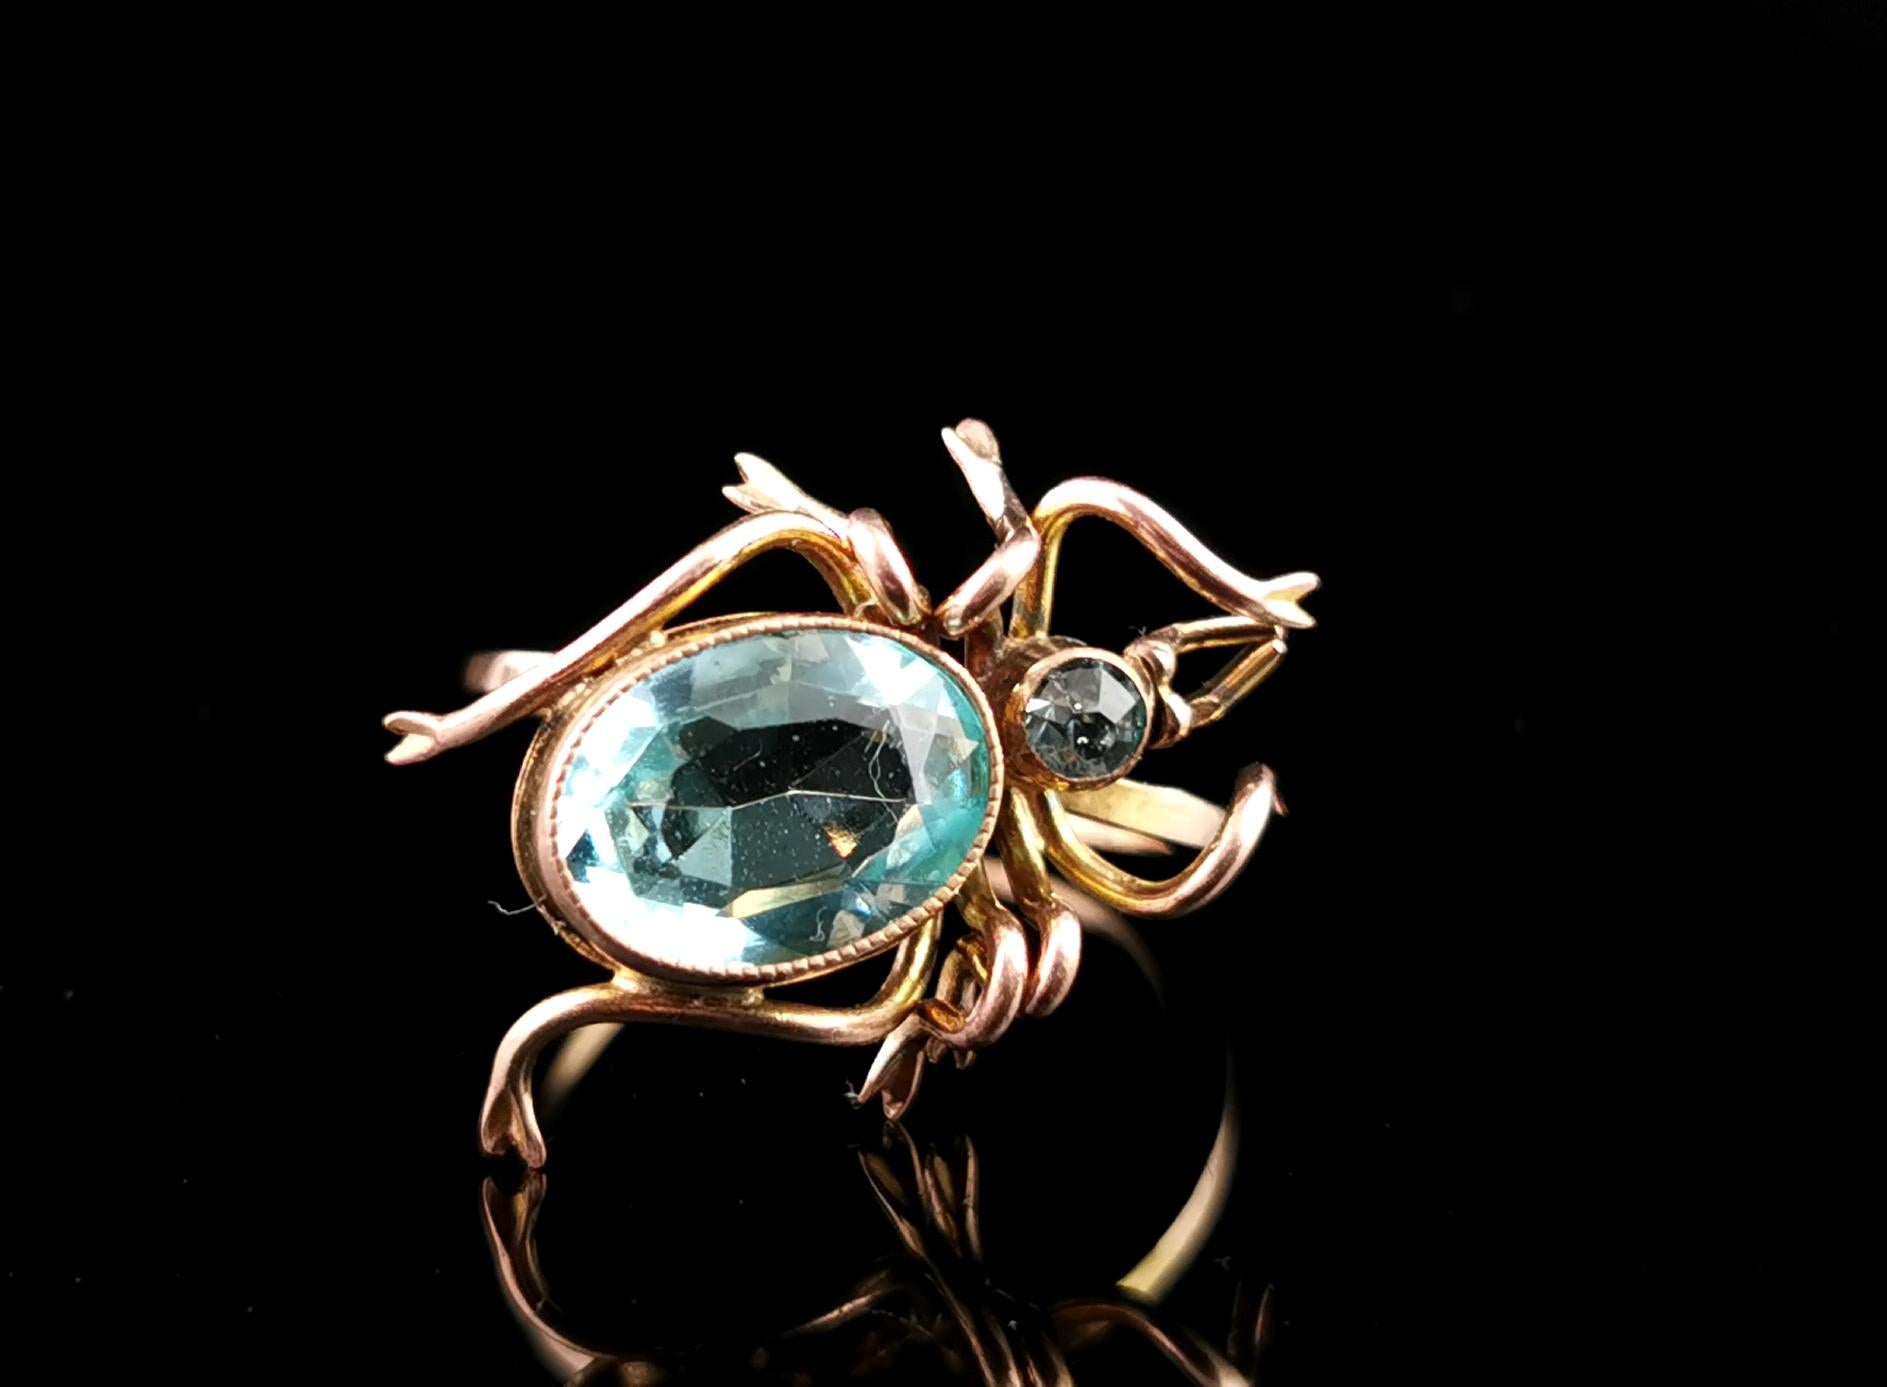 A fantastic antique paste spider conversion ring.

A 15ct rolled gold band converted from a bar brooch with a large gold plated spider to the front set with vibrant blue.

This makes for such an amazing statement ring and really stands out from the